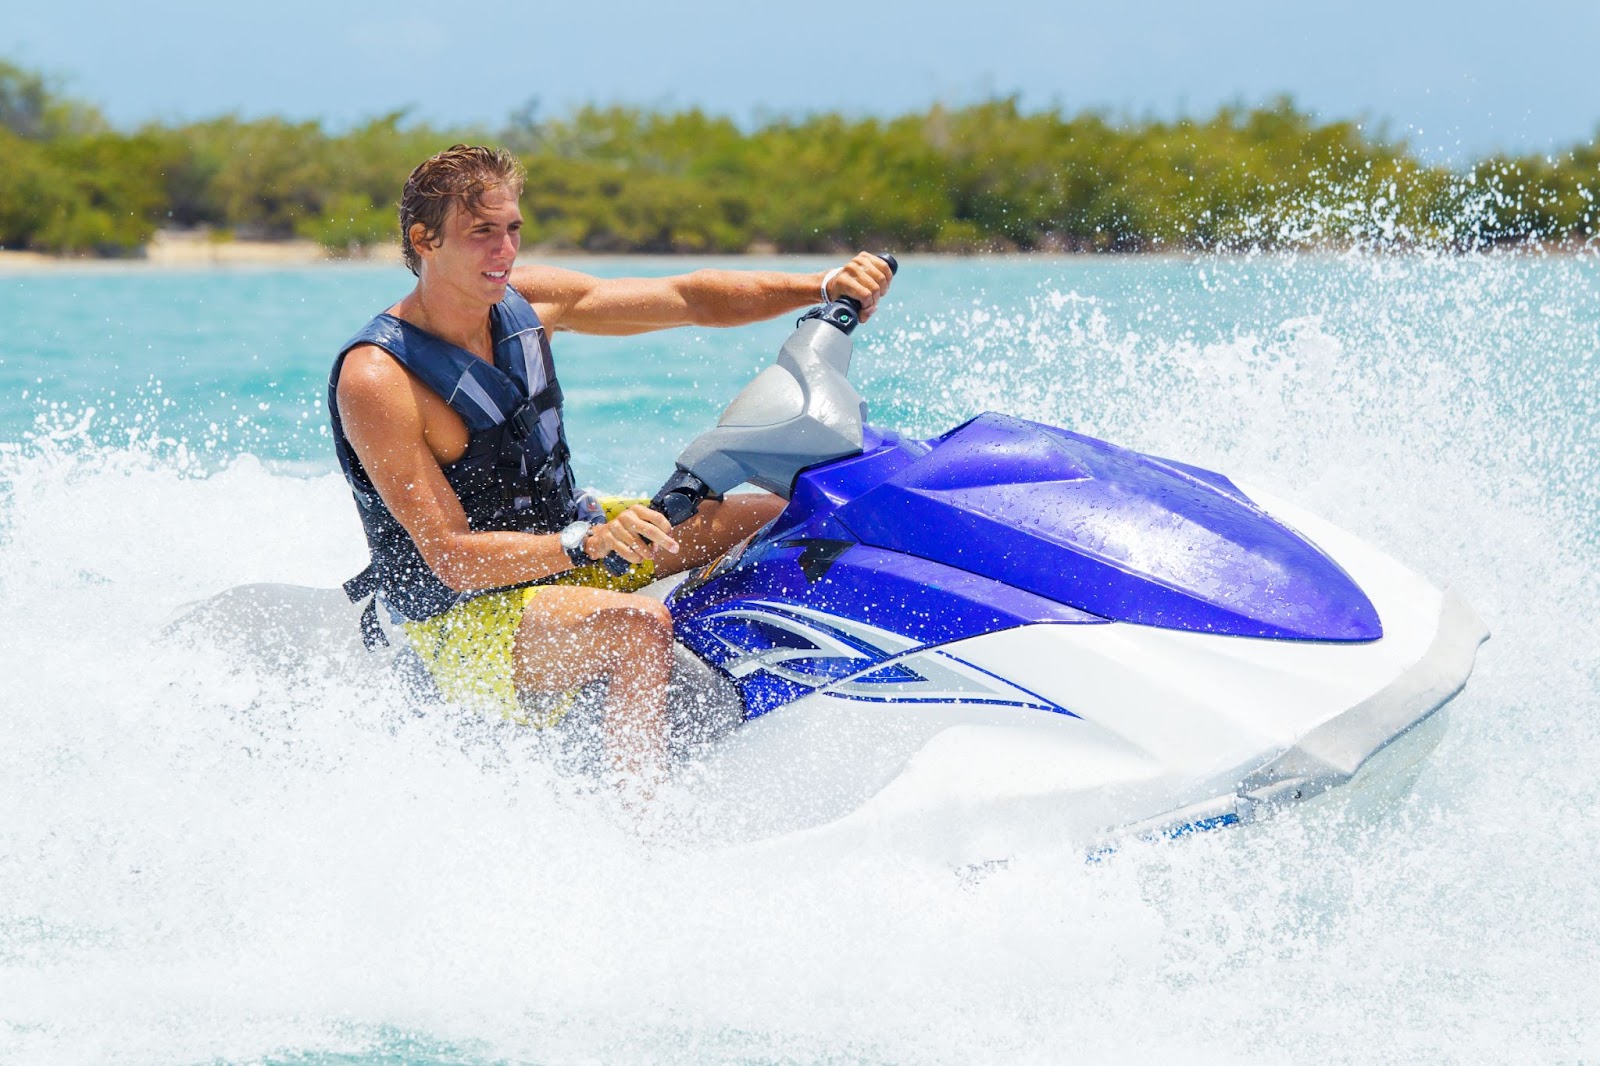 A man is riding in a jet ski.